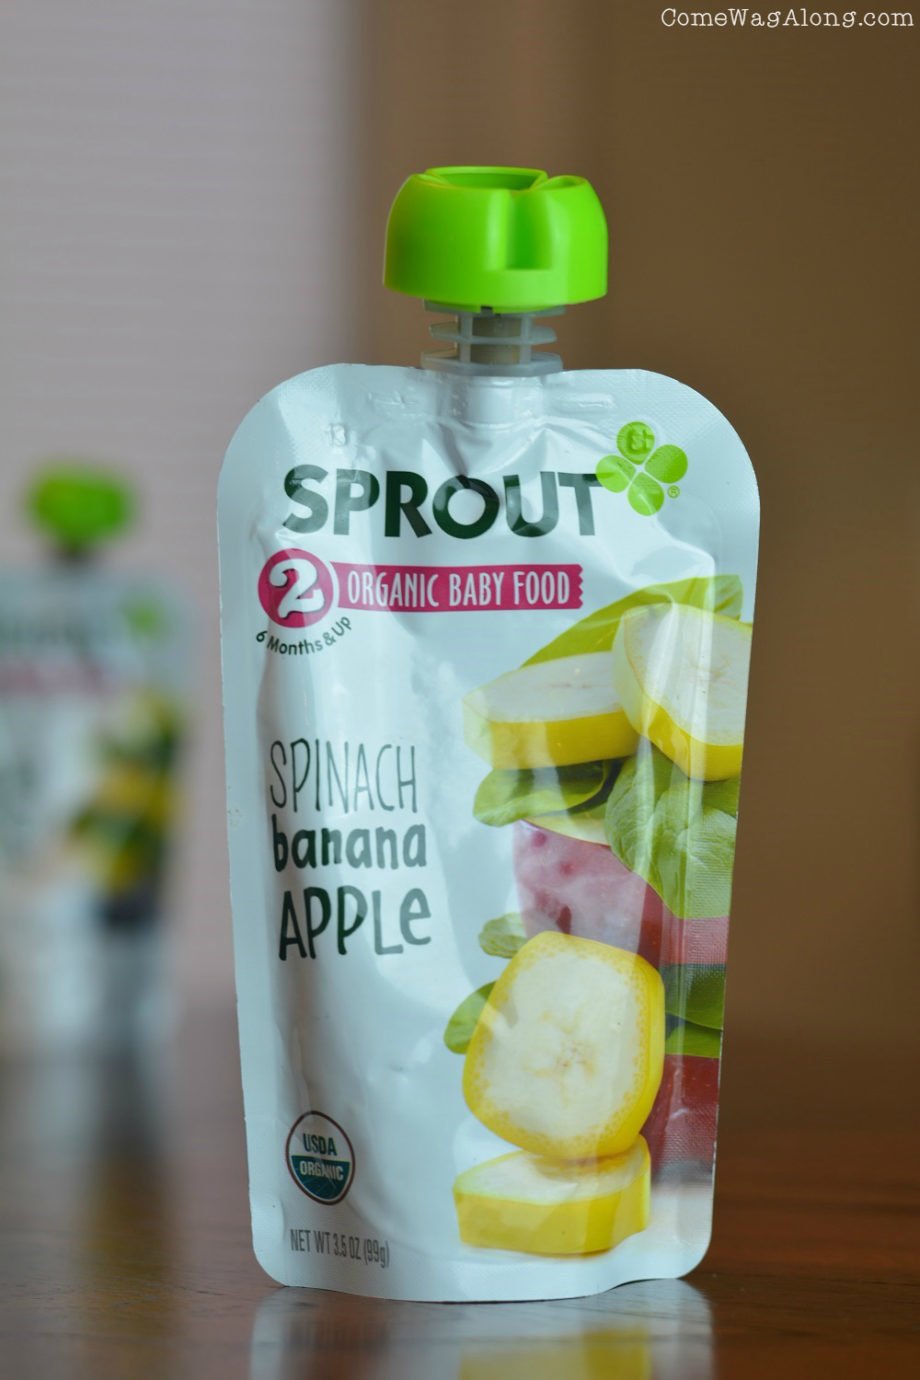 New Sprout Pouch Flavors - Spinach Banana Apple